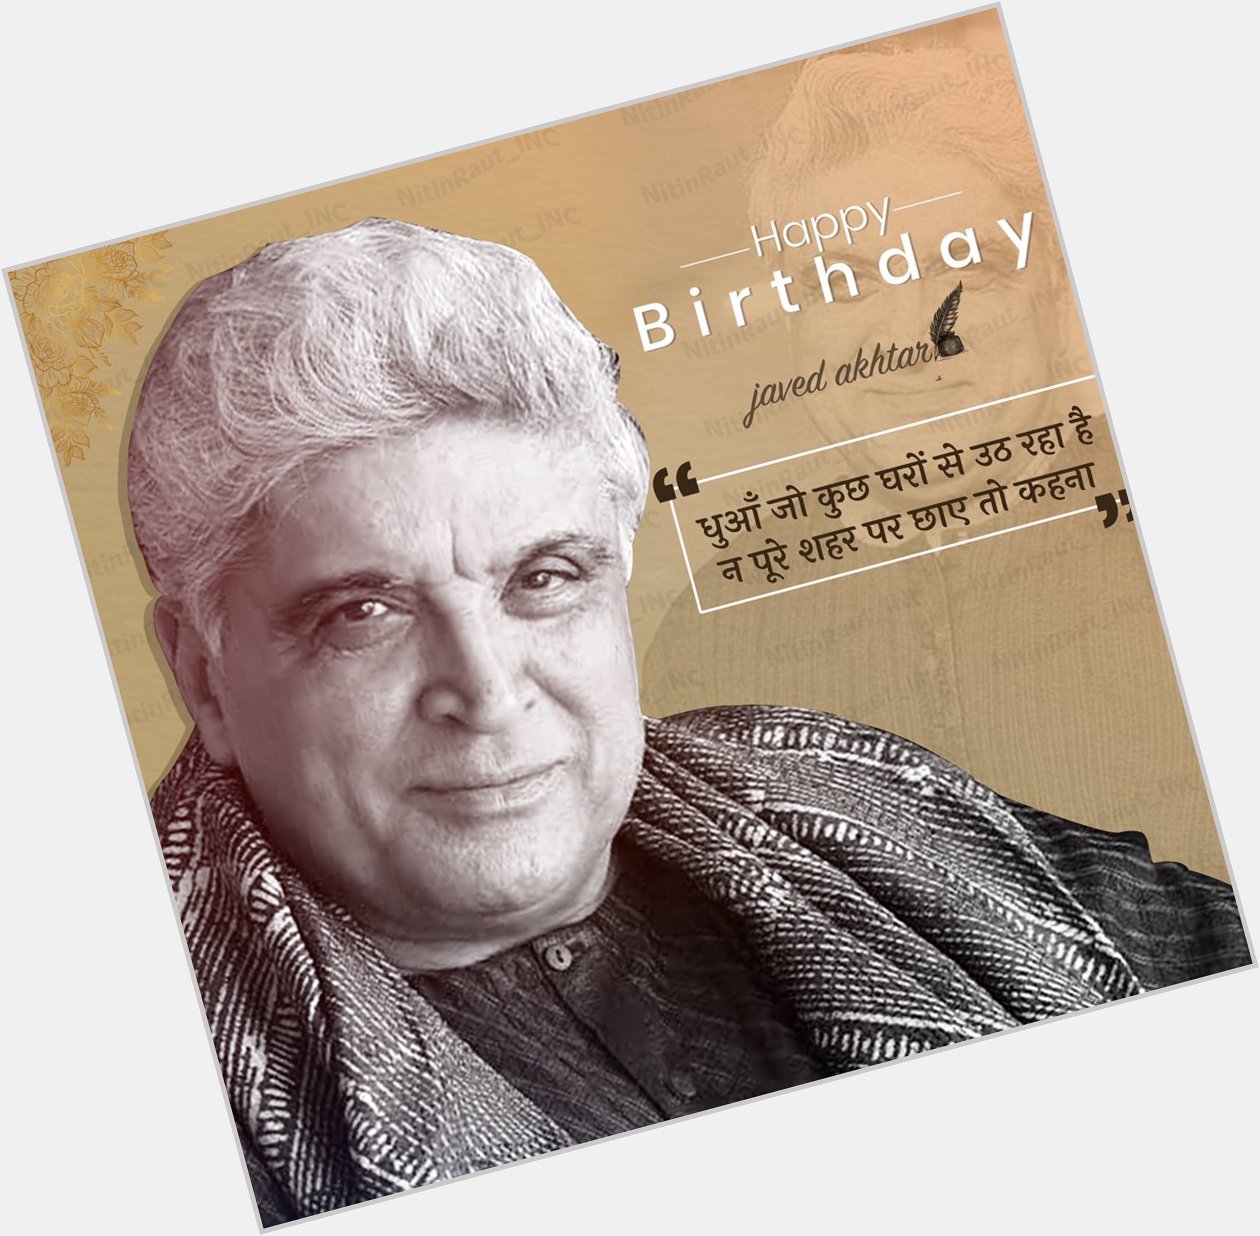 Wishing The Great Javed Akhtar A Very Happy Birthday 